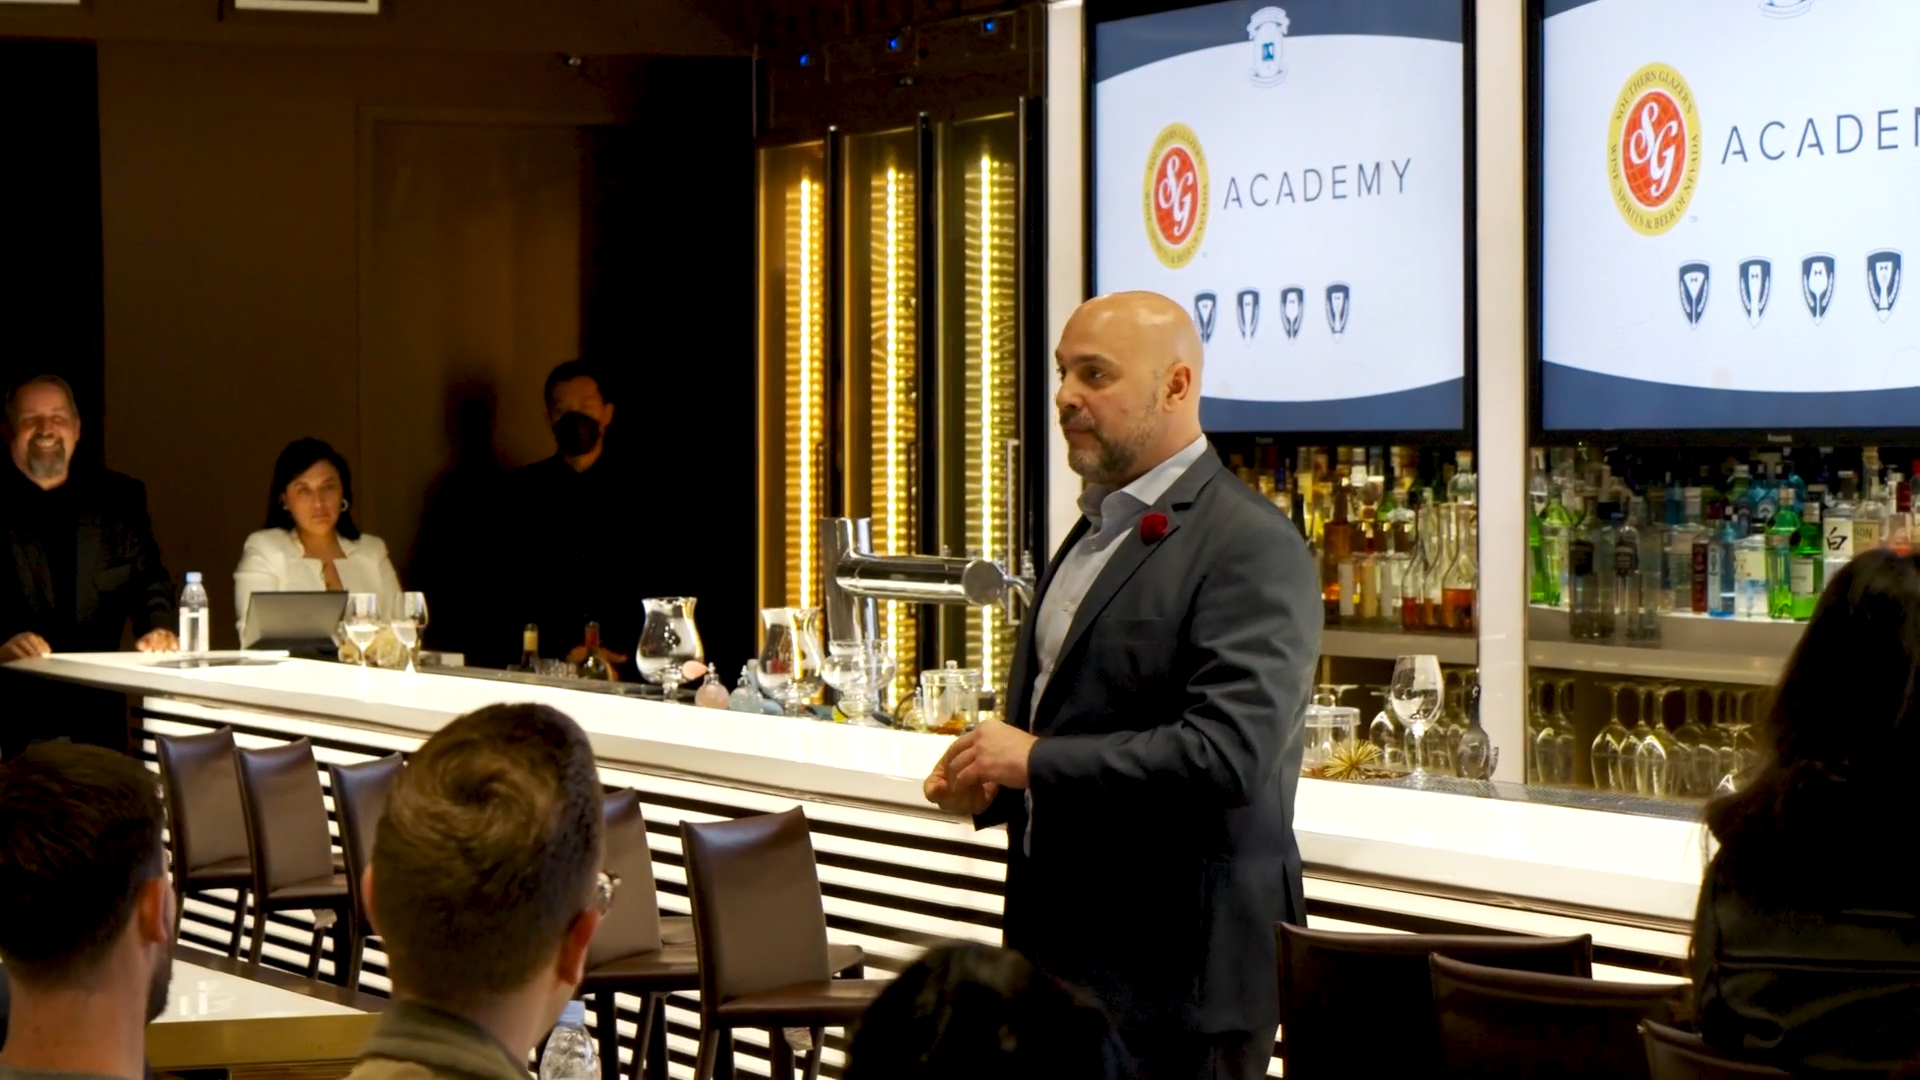 Southern Glazer's Wine & Spirits reopens its Las Vegas Academy, the top beverage education center in Southern Nevada.